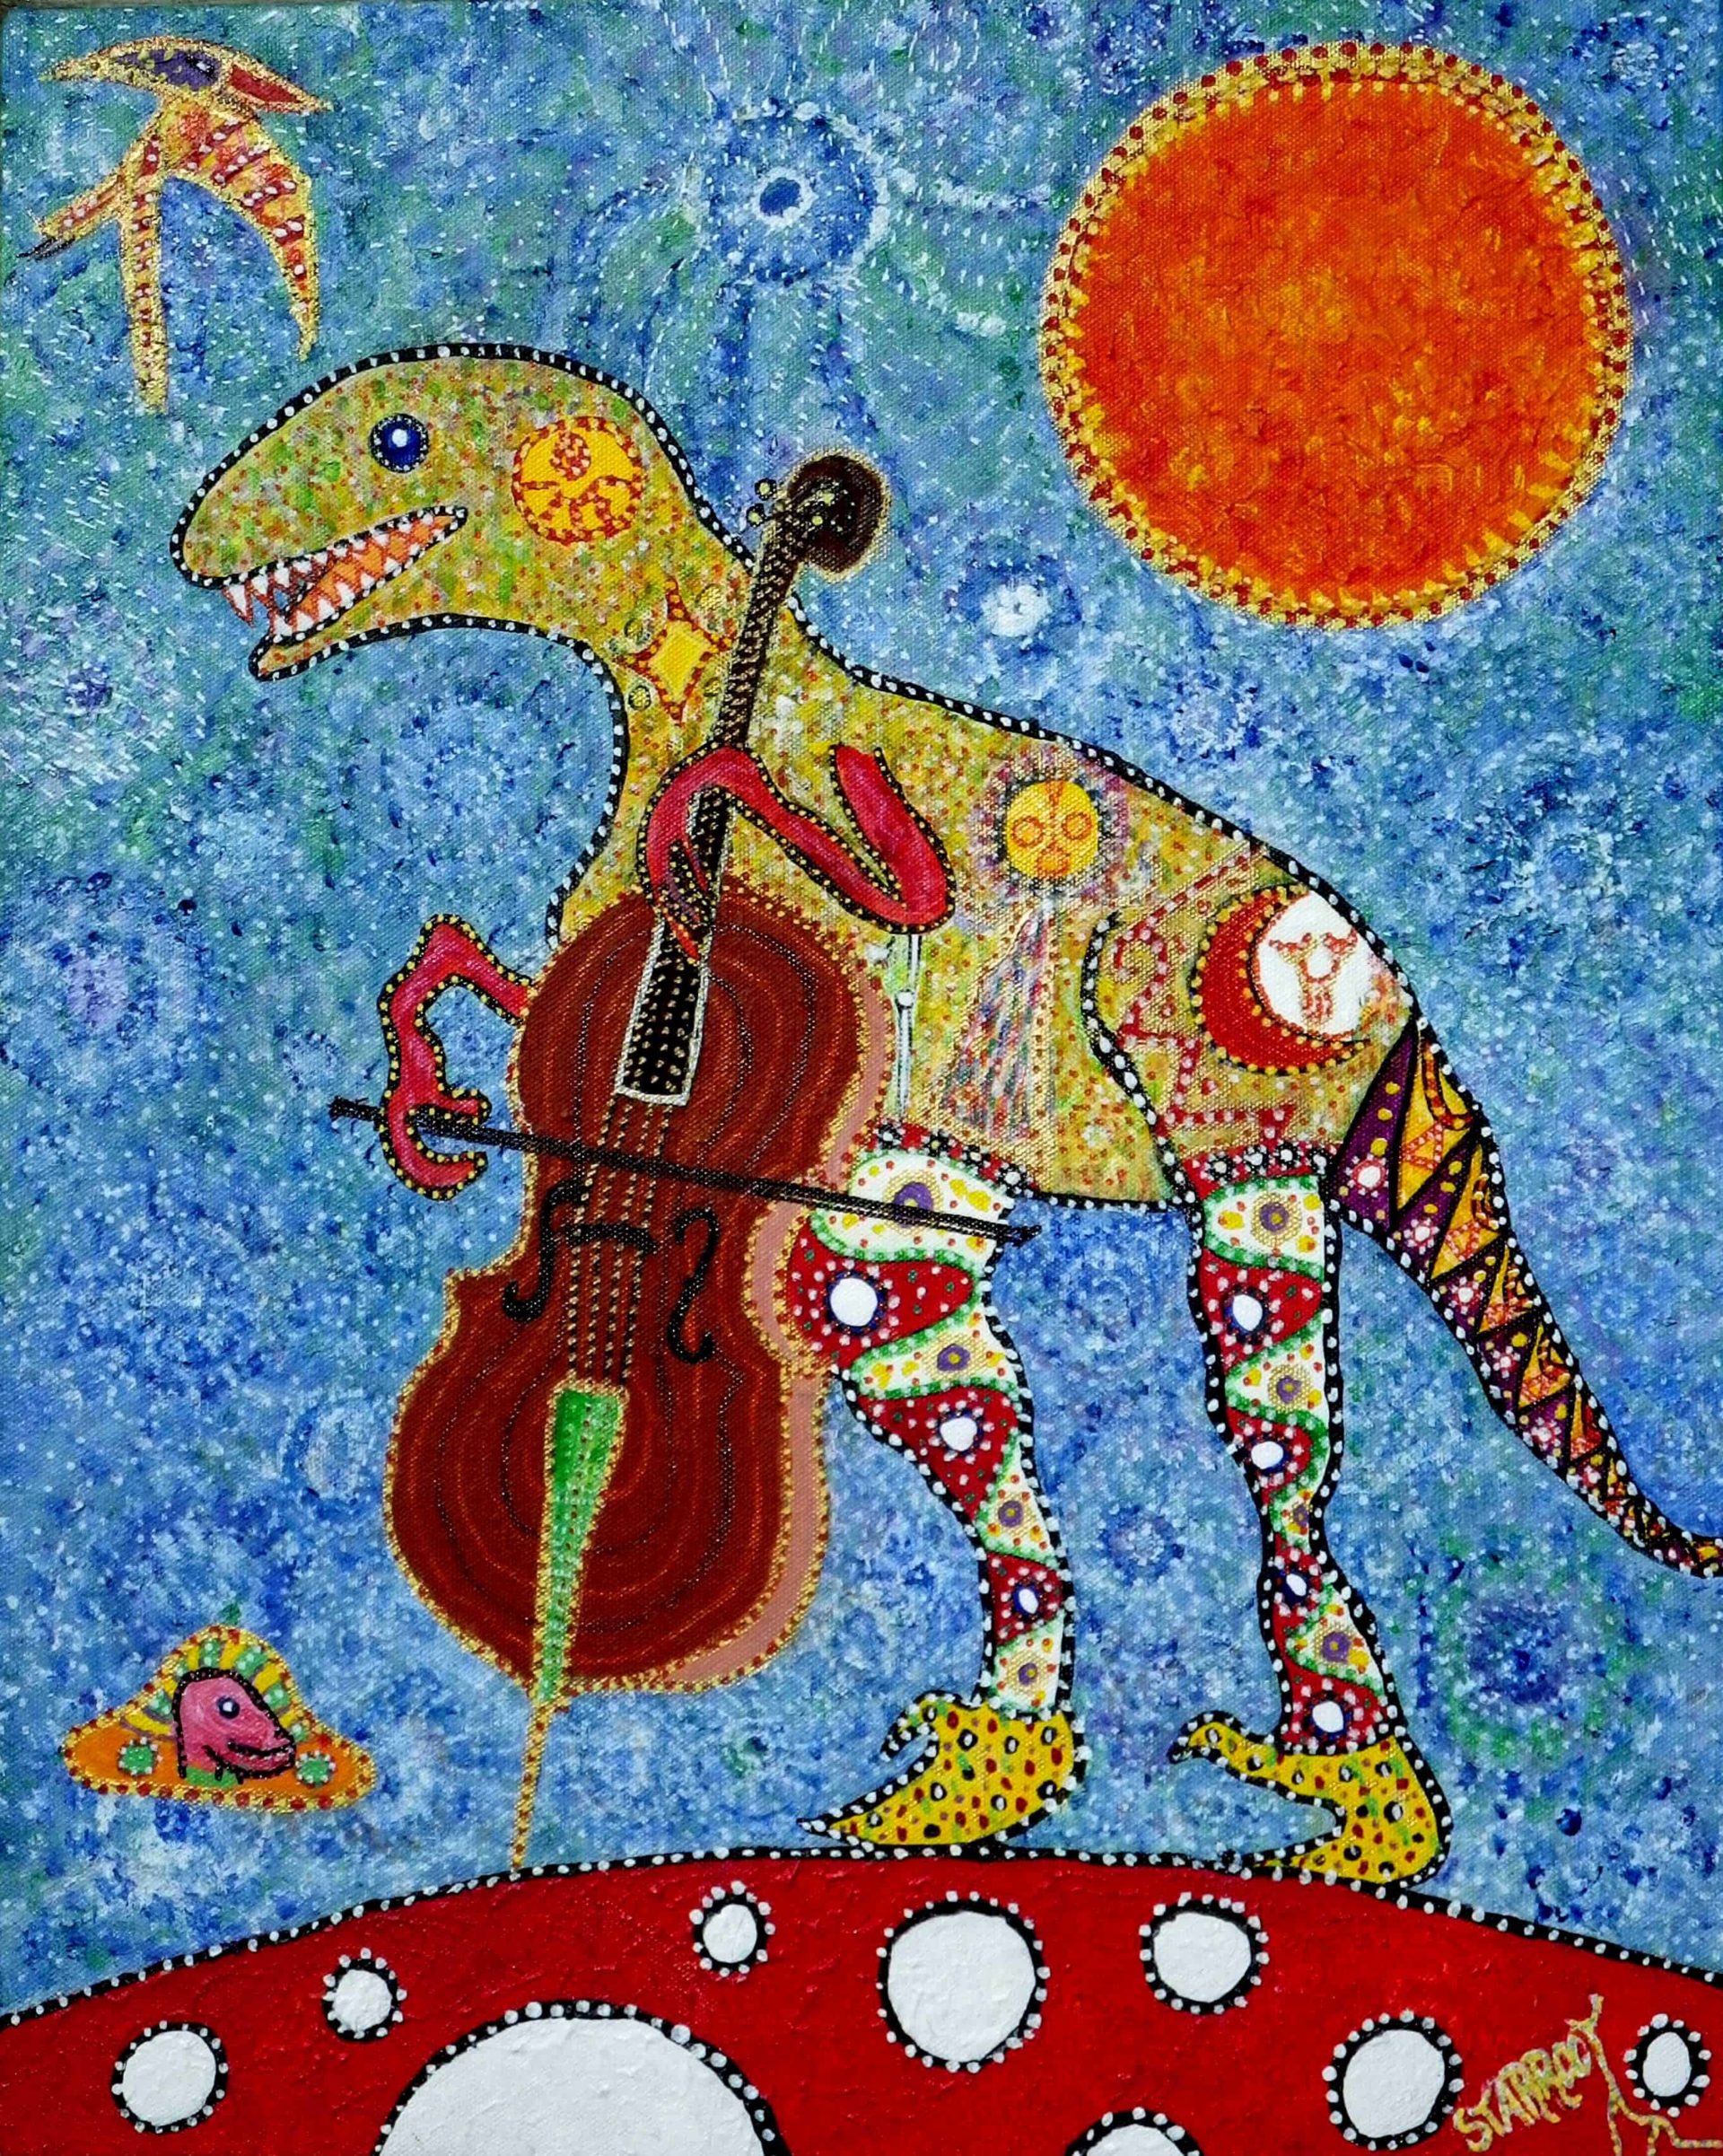 Dino Playing Cello by Starroot